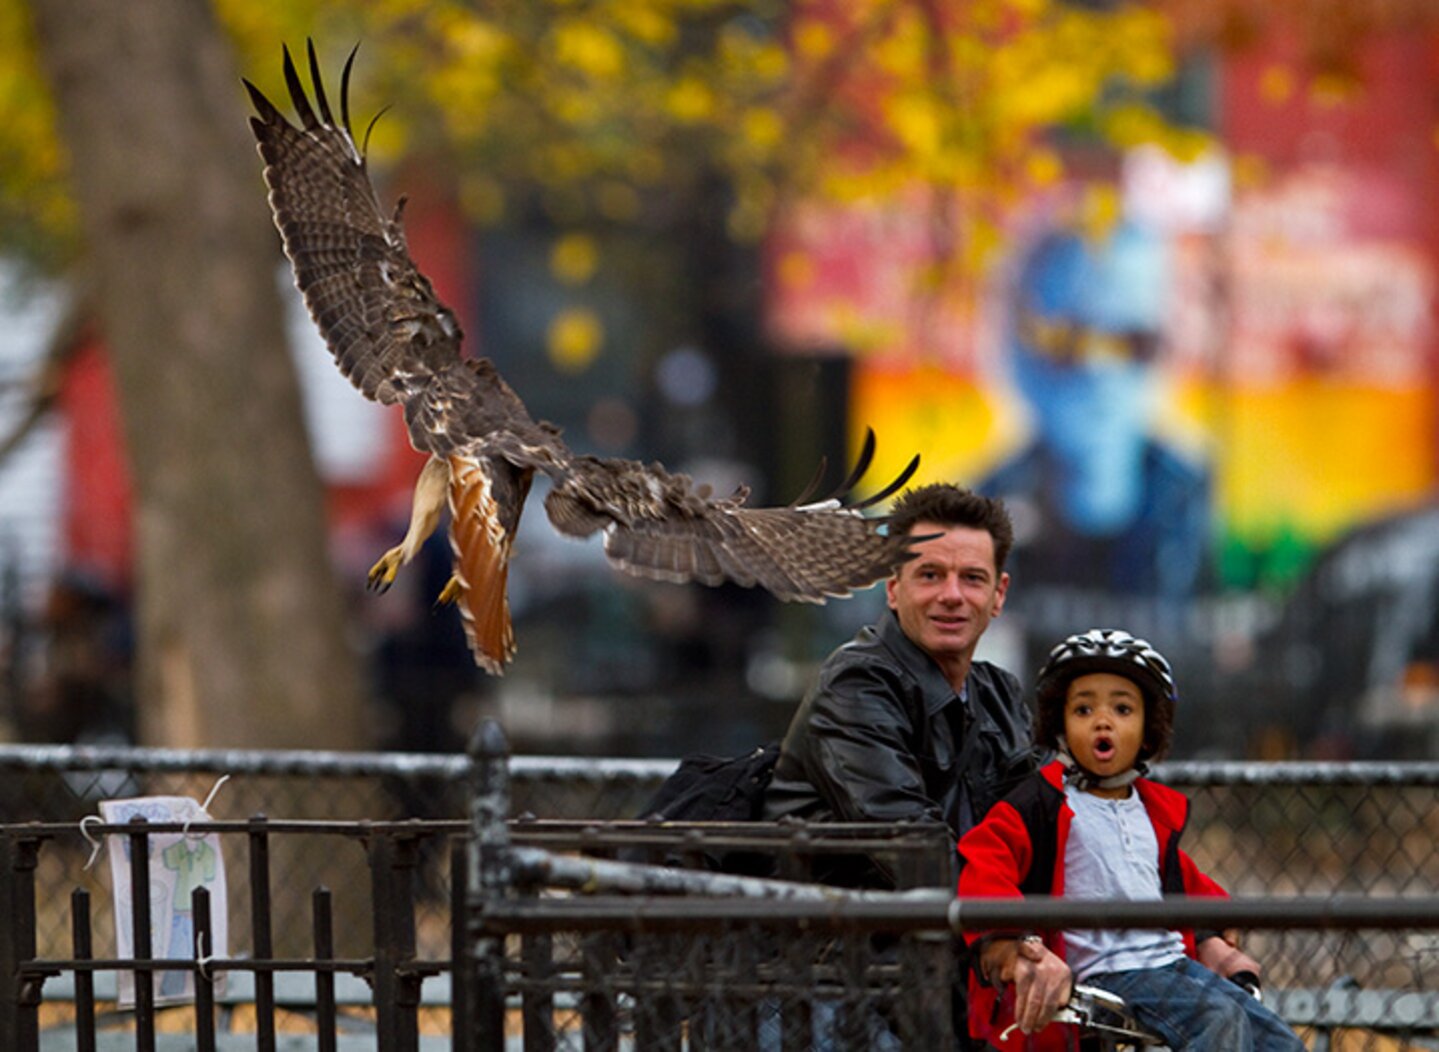 A Red-tailed Hawk wows onlookers in Tompkins Square Park. Photo: <a href="http://www.fotoportmann.com/" target="_blank" >François Portmann</a>